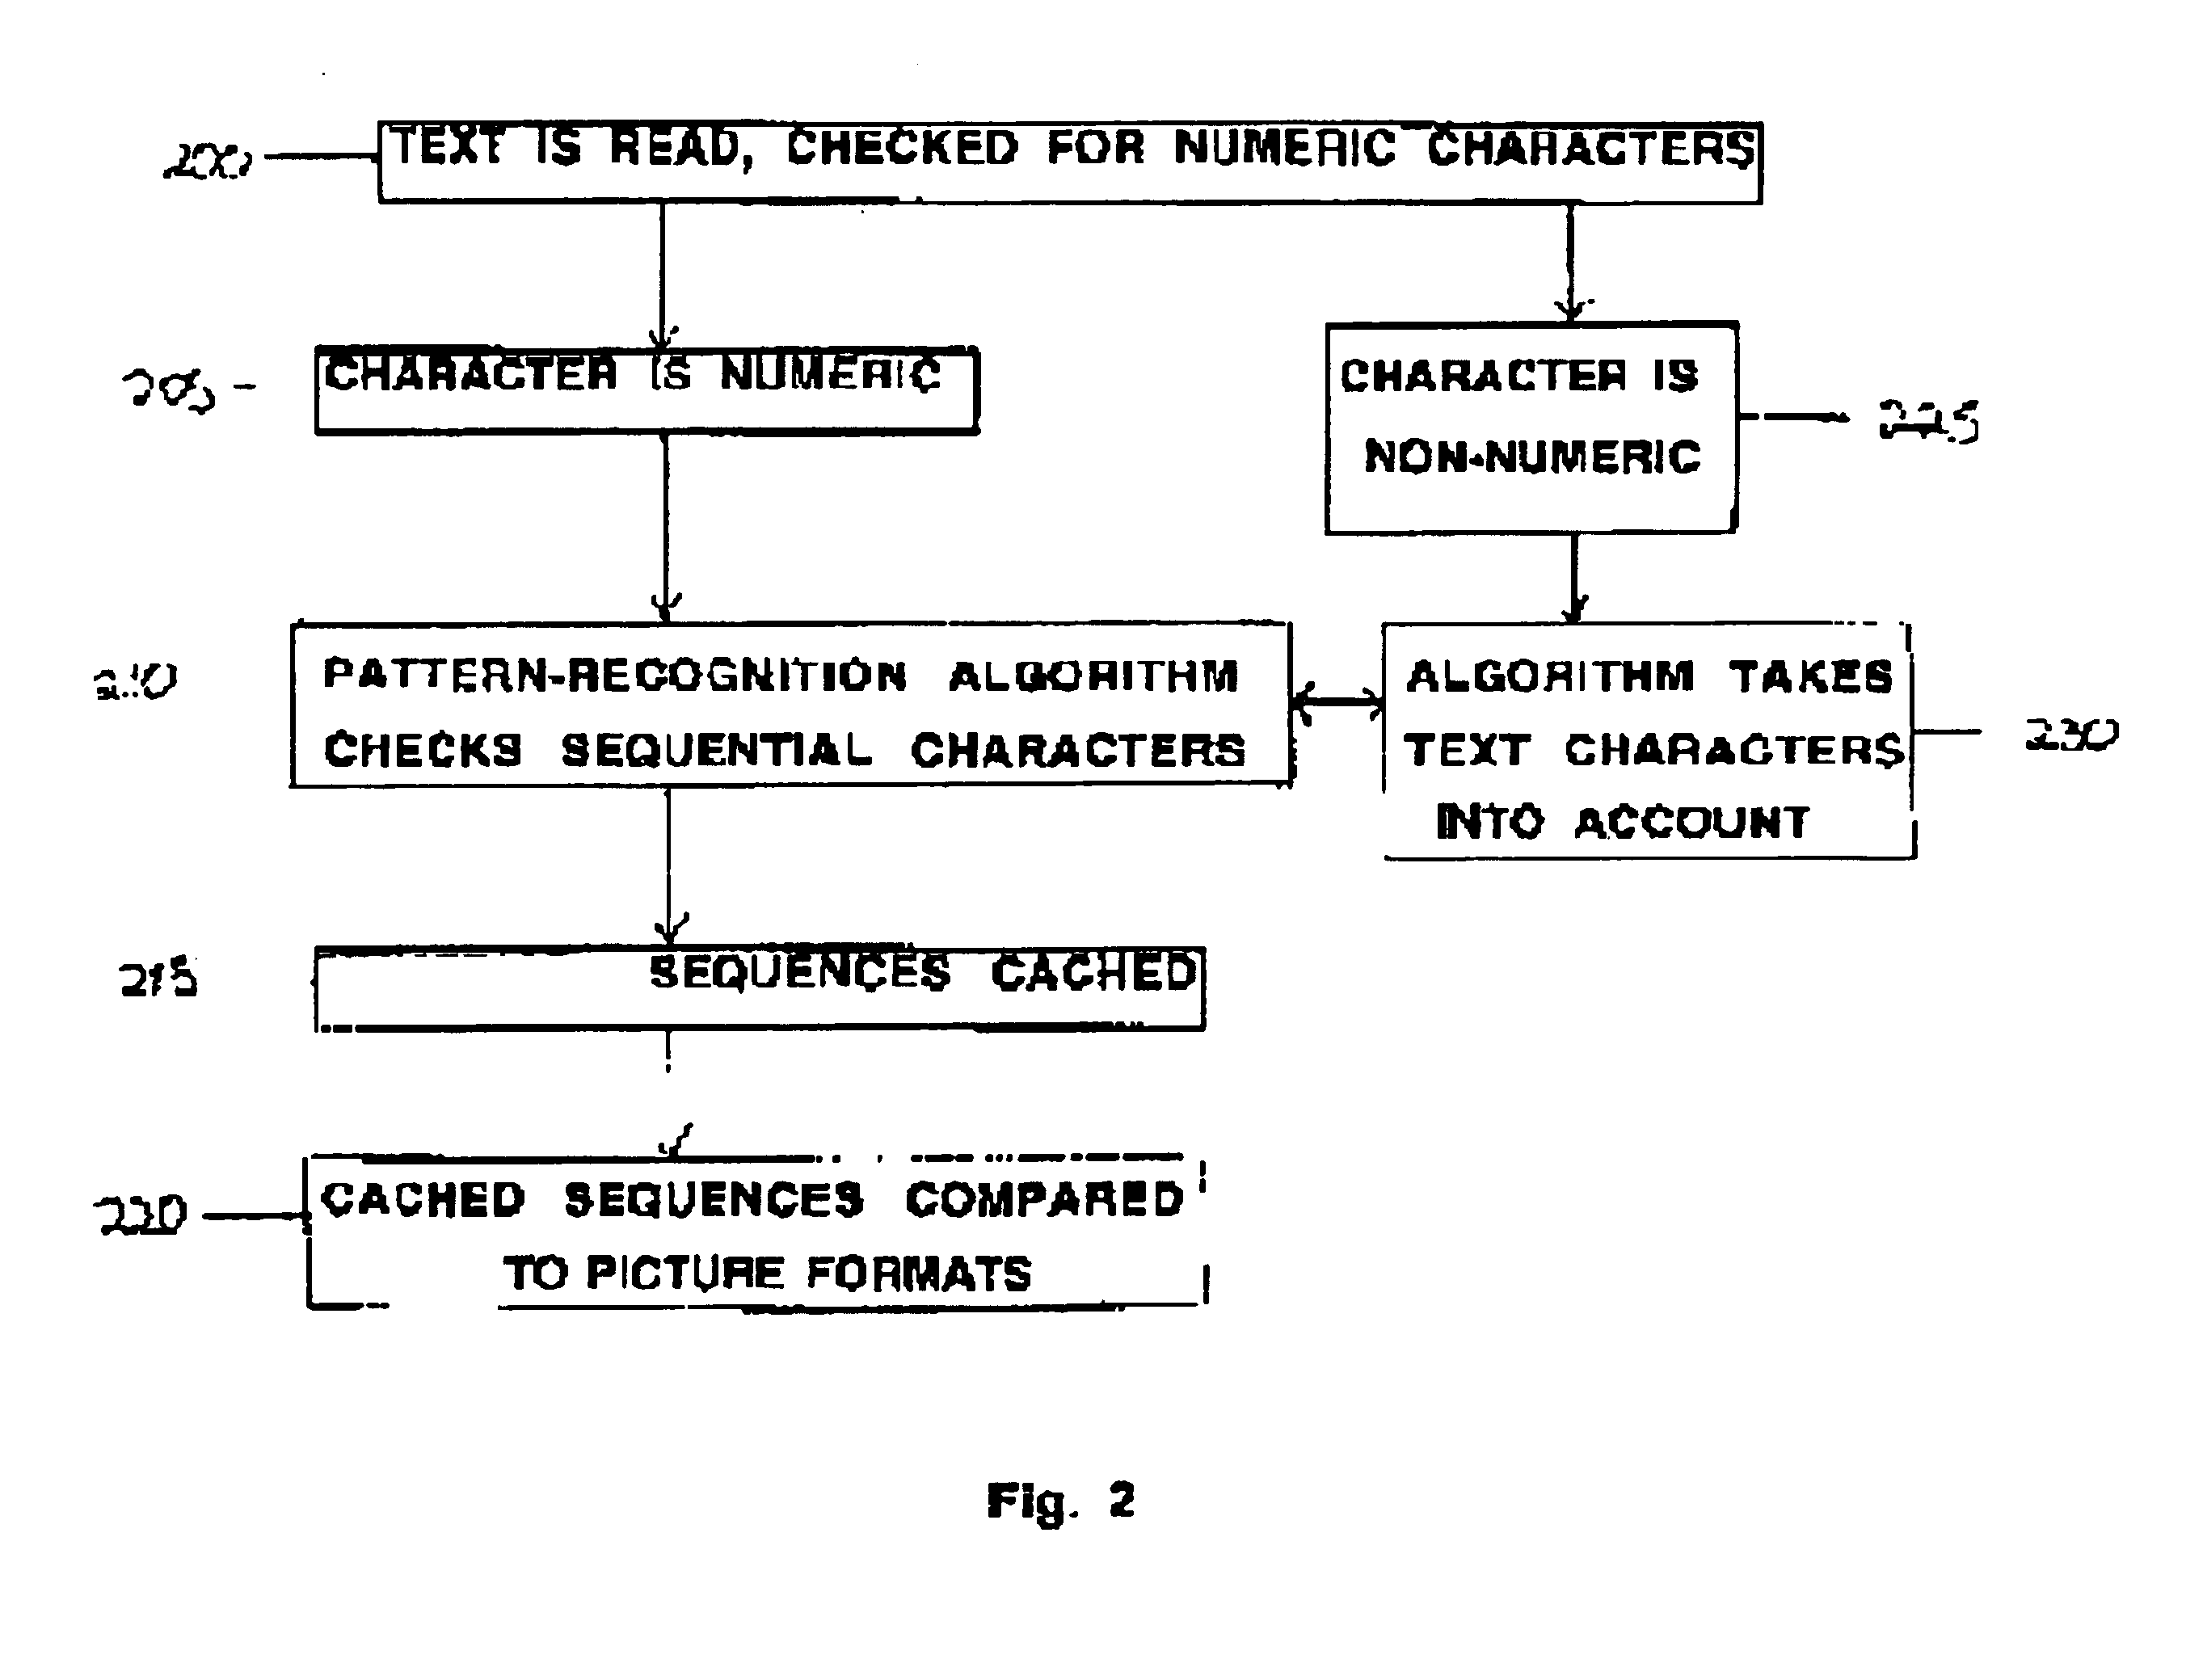 Method and apparatus for iconifying and automatically dialing telephone numbers which appear on a Web page